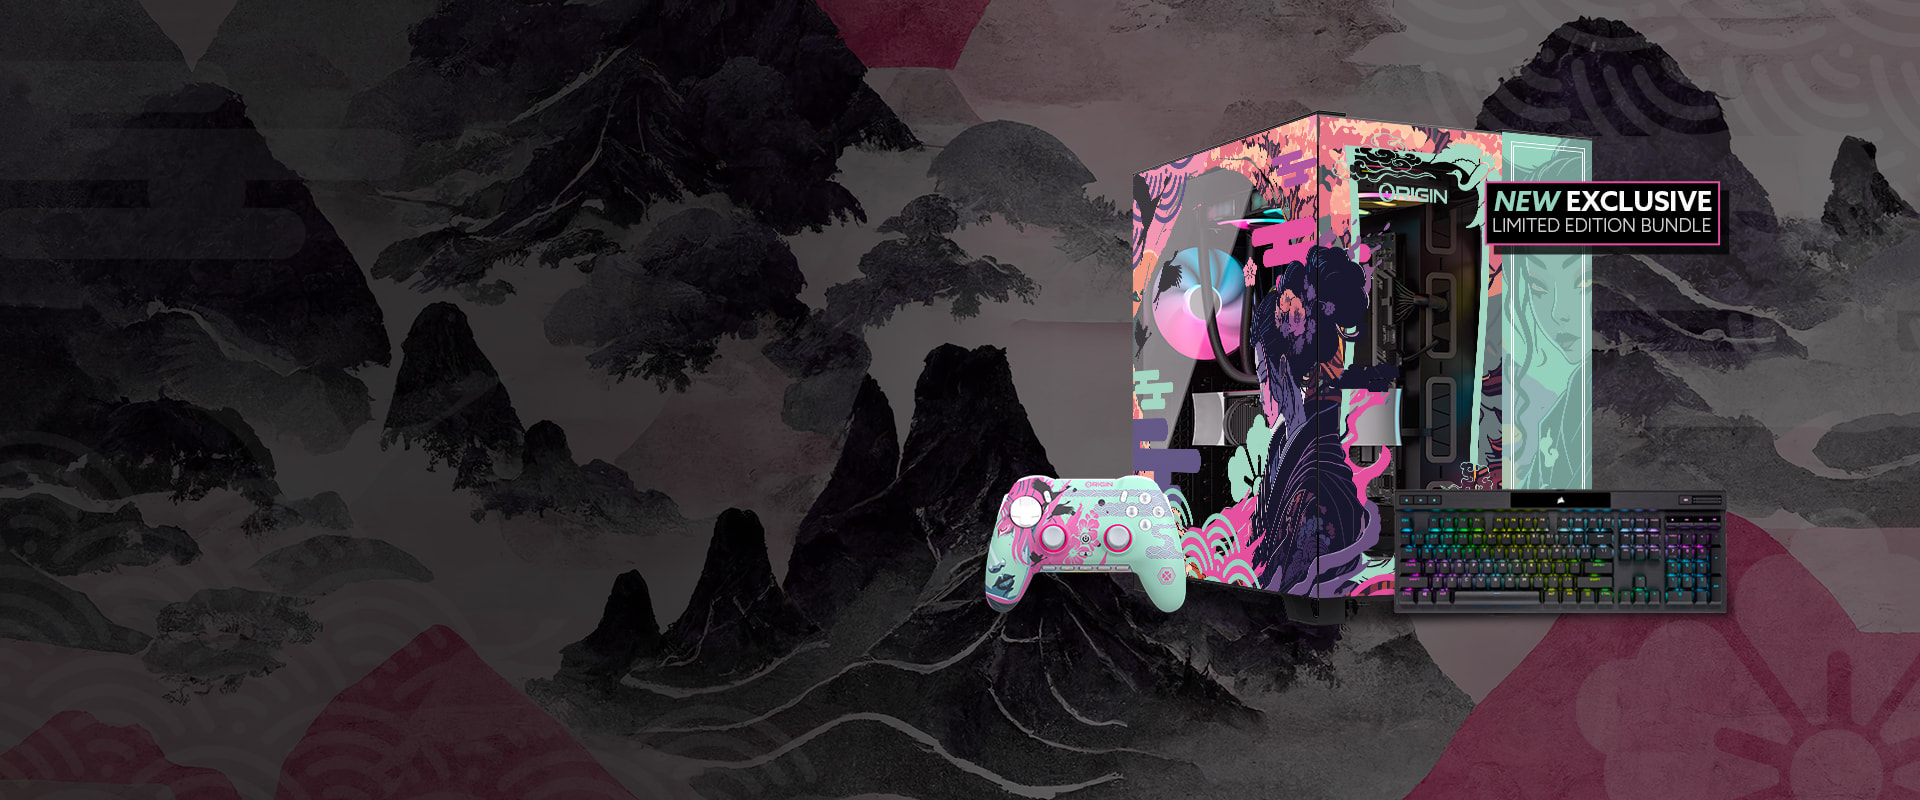 New Exclusive Limited Edition Bundle - Onna-Bugeisha by Suto Customs